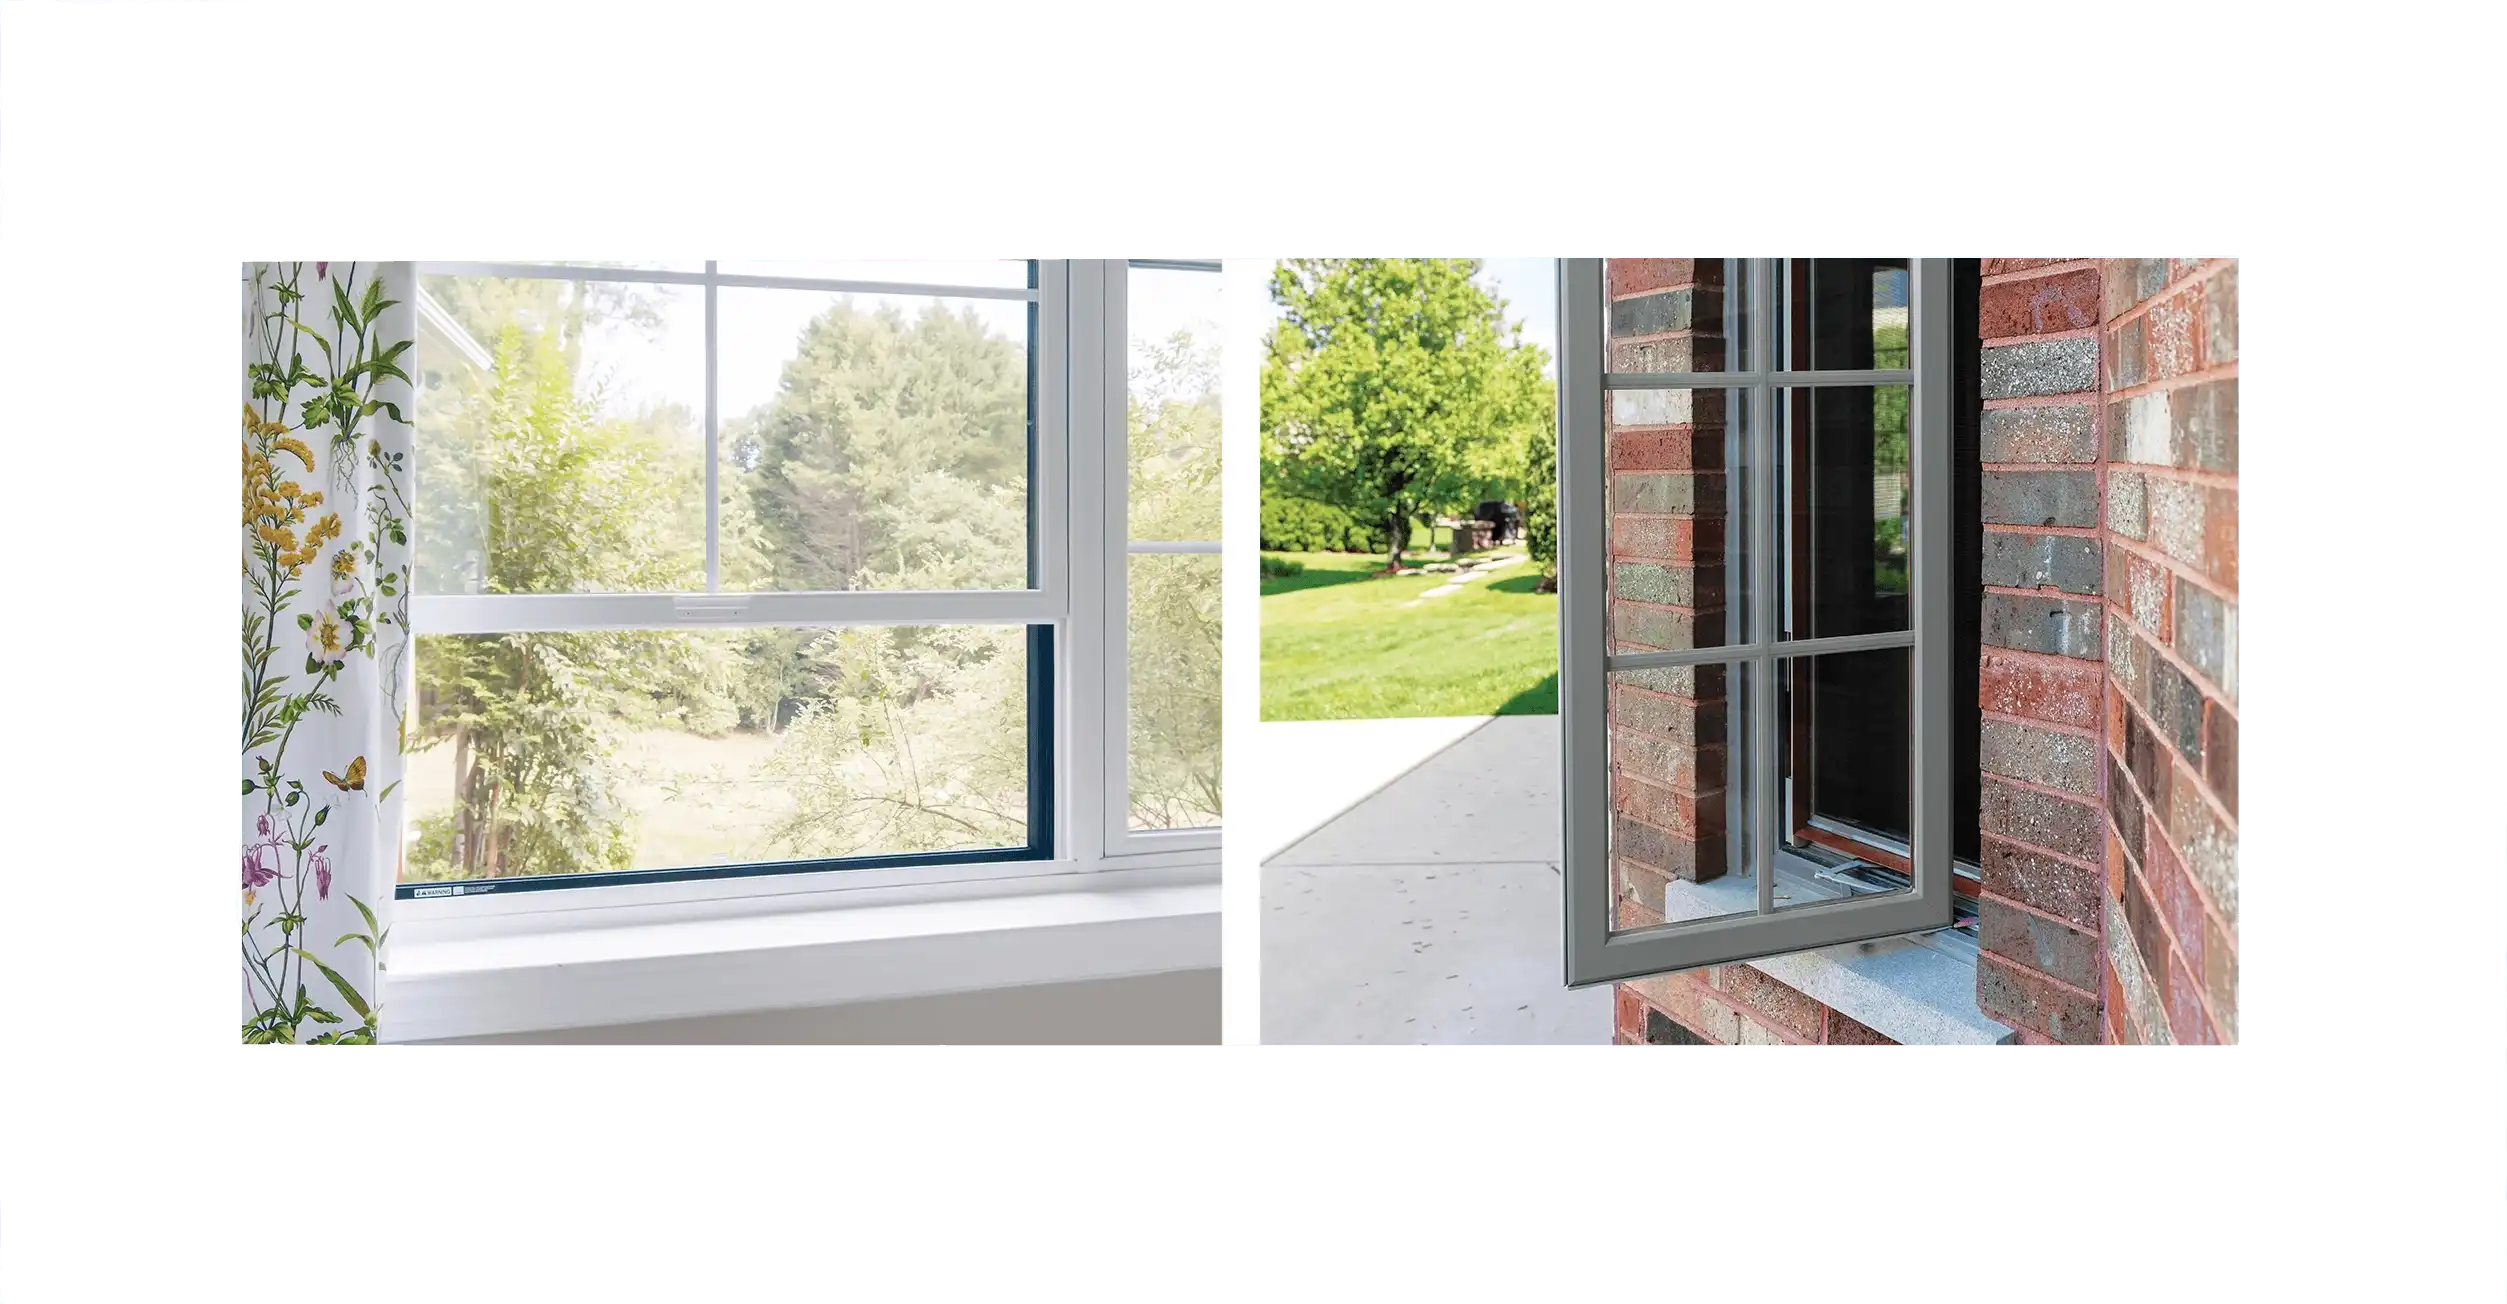 Side by side of a double hung window on the left and a casement on the right